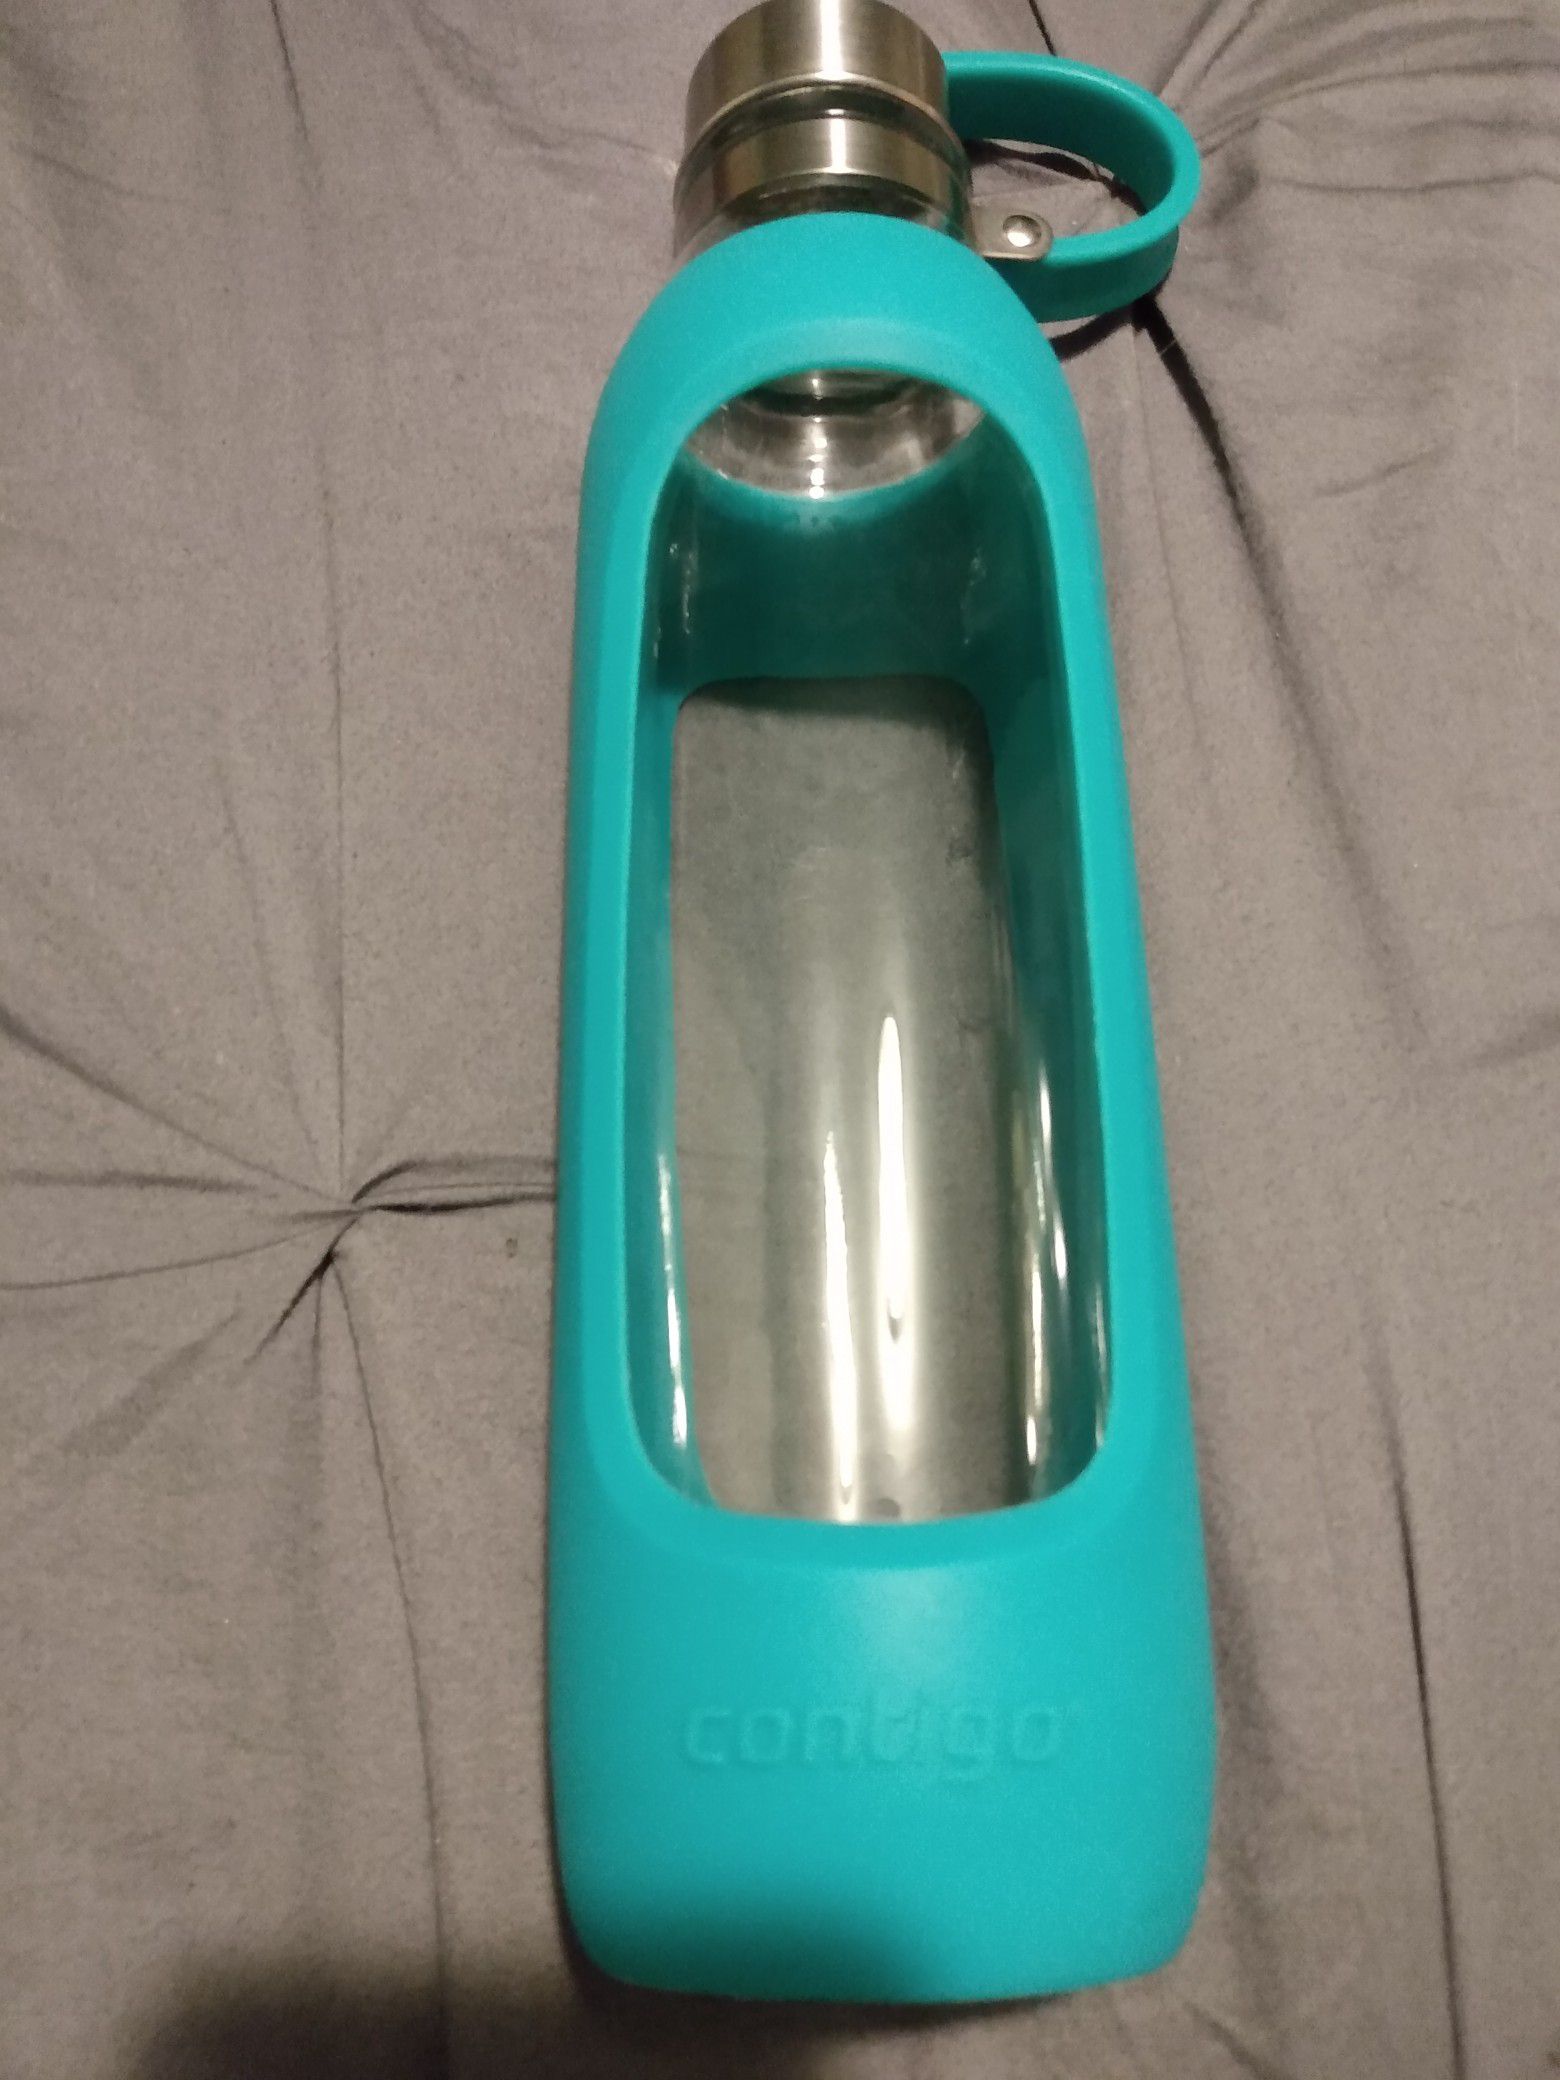 Contigo glass water bottle with screw off top - teal